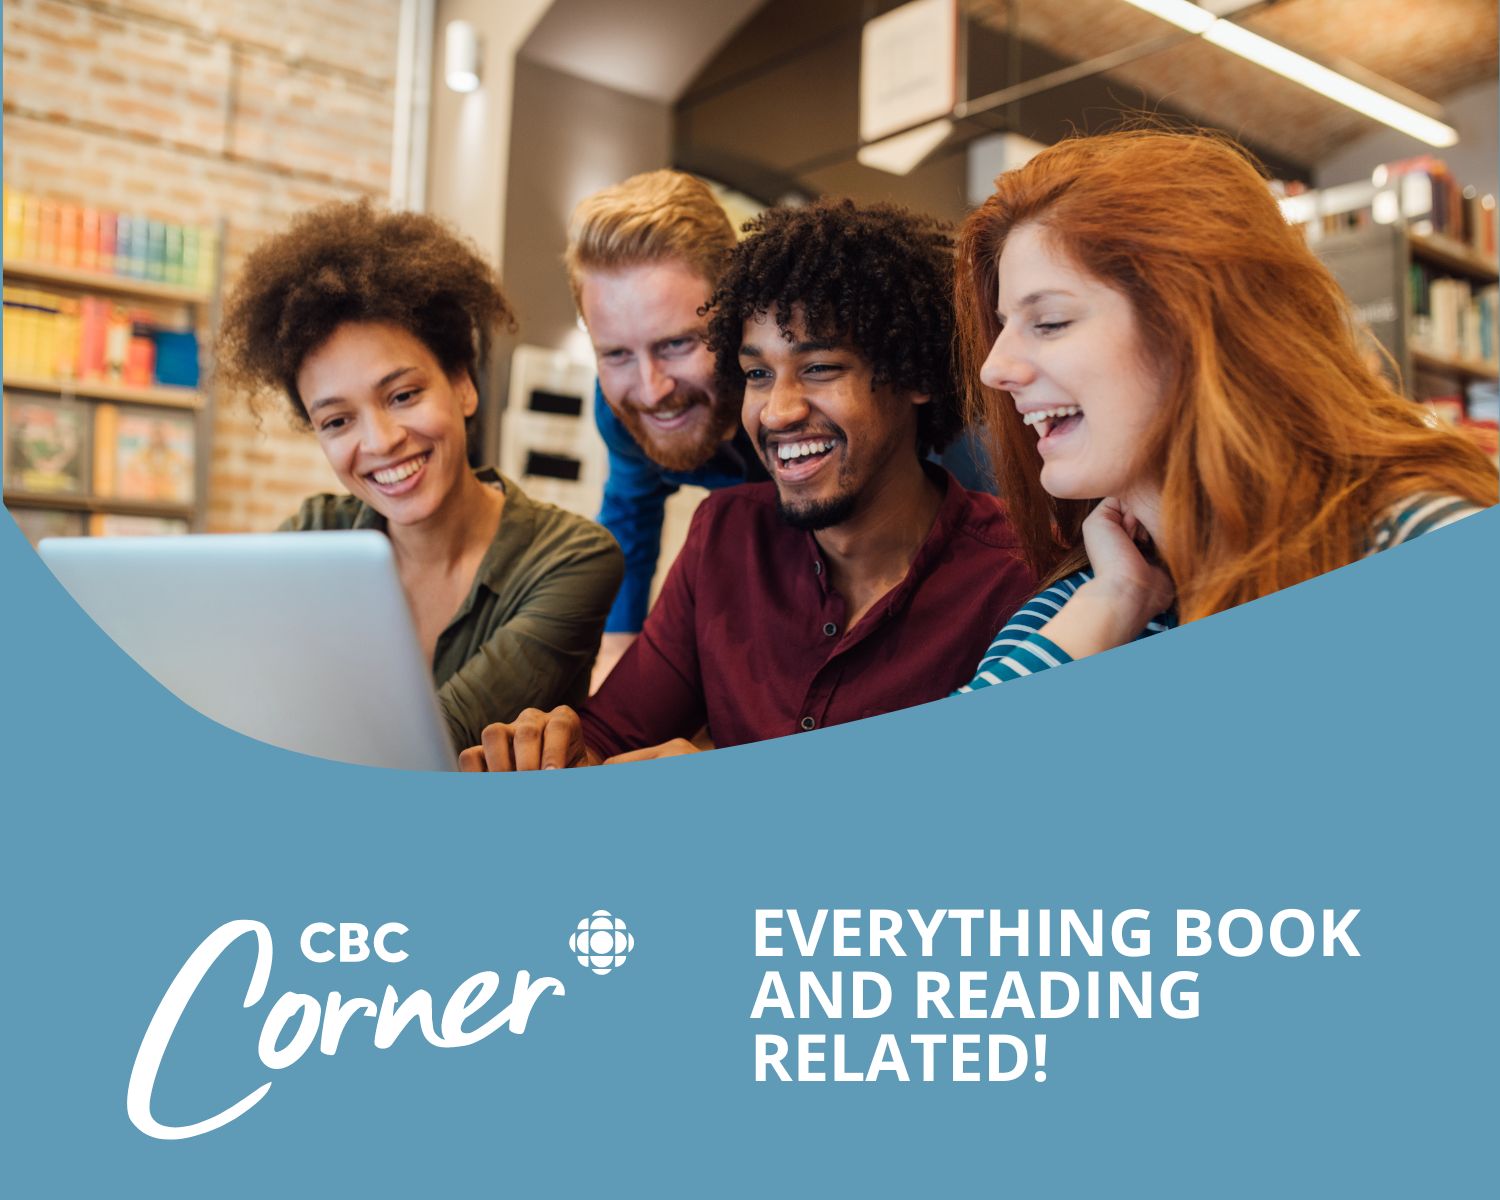 CBC Corner: "Everything book and reading related!" - A group of friends on a laptop